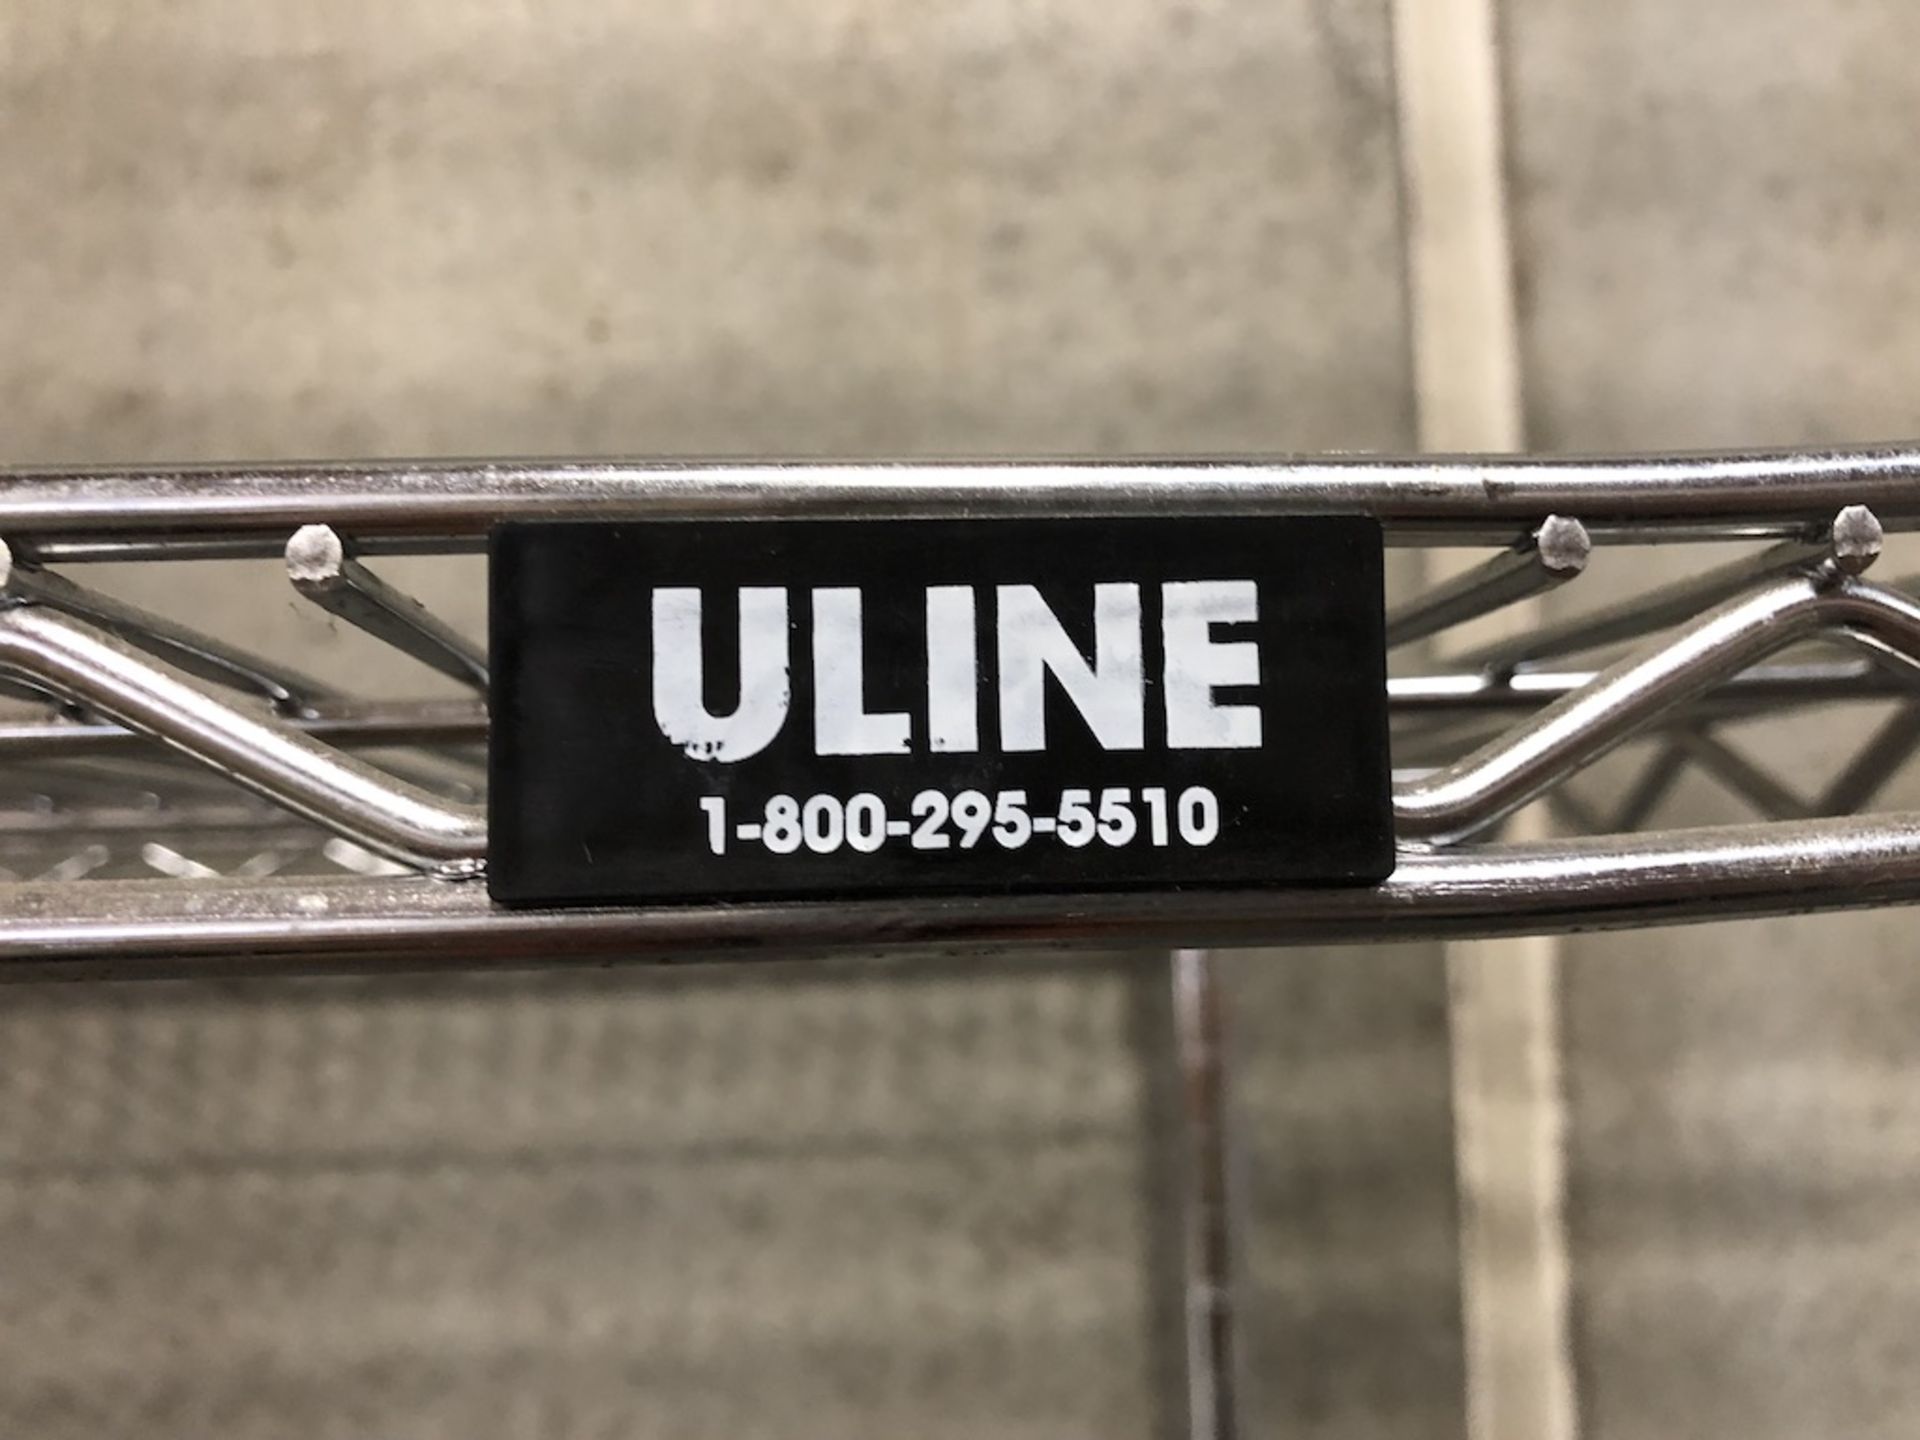 ULINE STEEL WIRE RACK 6FT H X 47IN L X 18IN W   SCHNEIDER ELECTRIC- 6611 PRESTON AVE SUITE A - Image 2 of 3